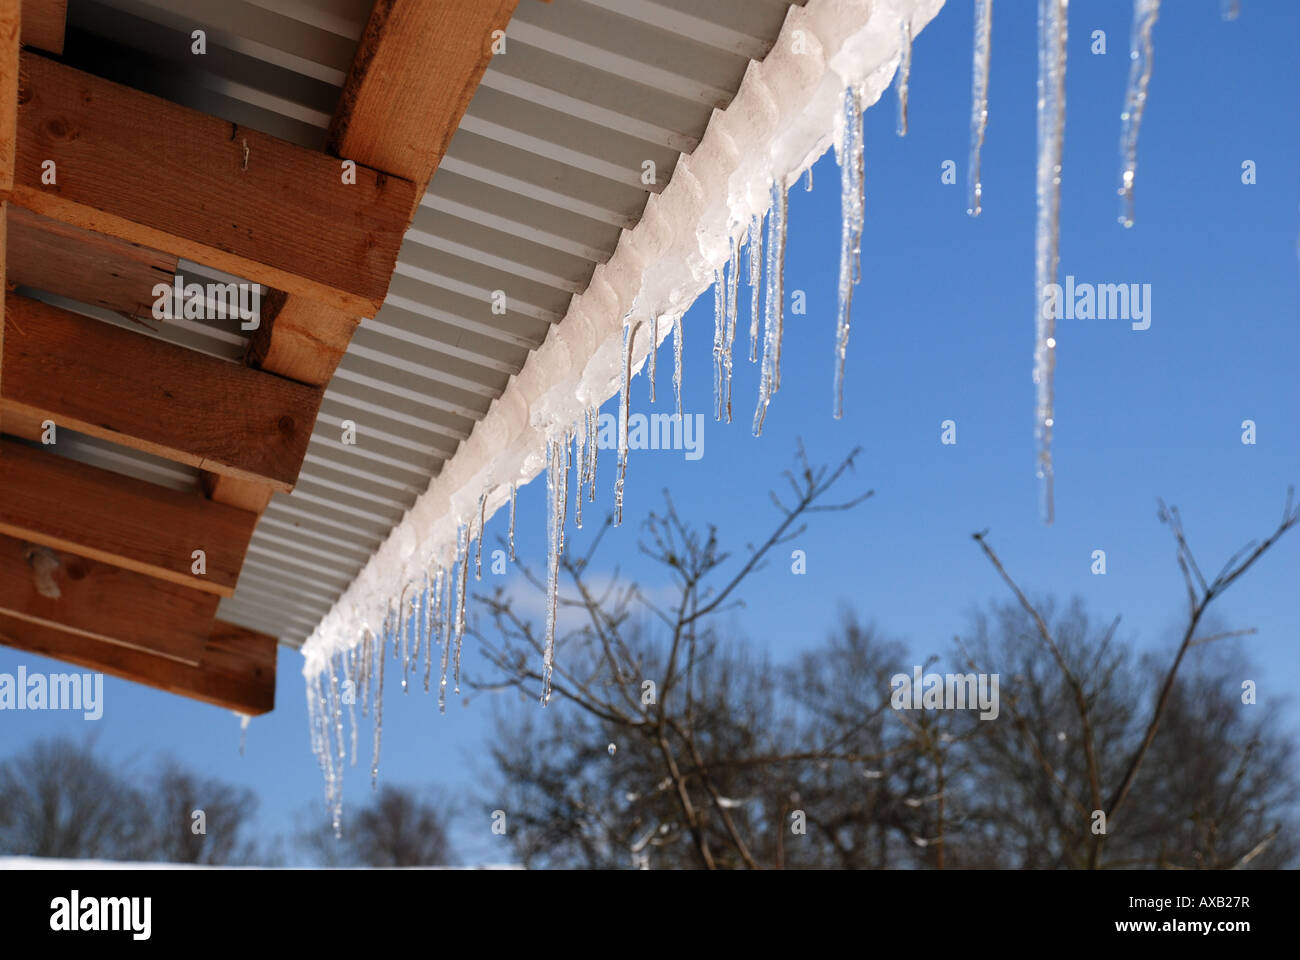 Icicles Hanging from Roof Stock Photo